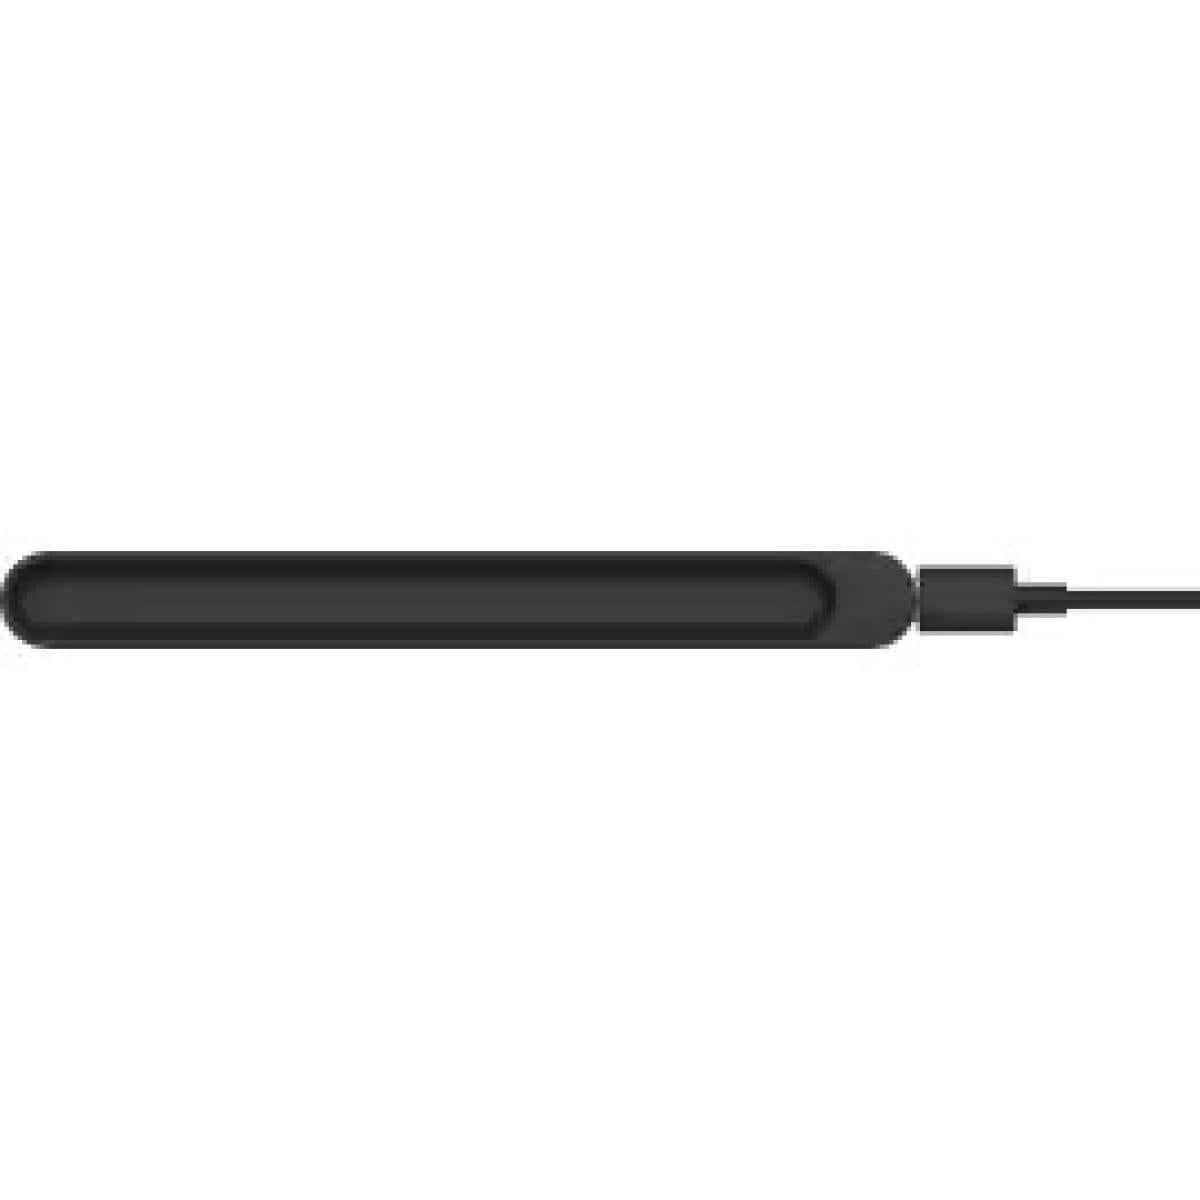 Microsoft Surface surface Microsoft Surface Slim Pen Charge